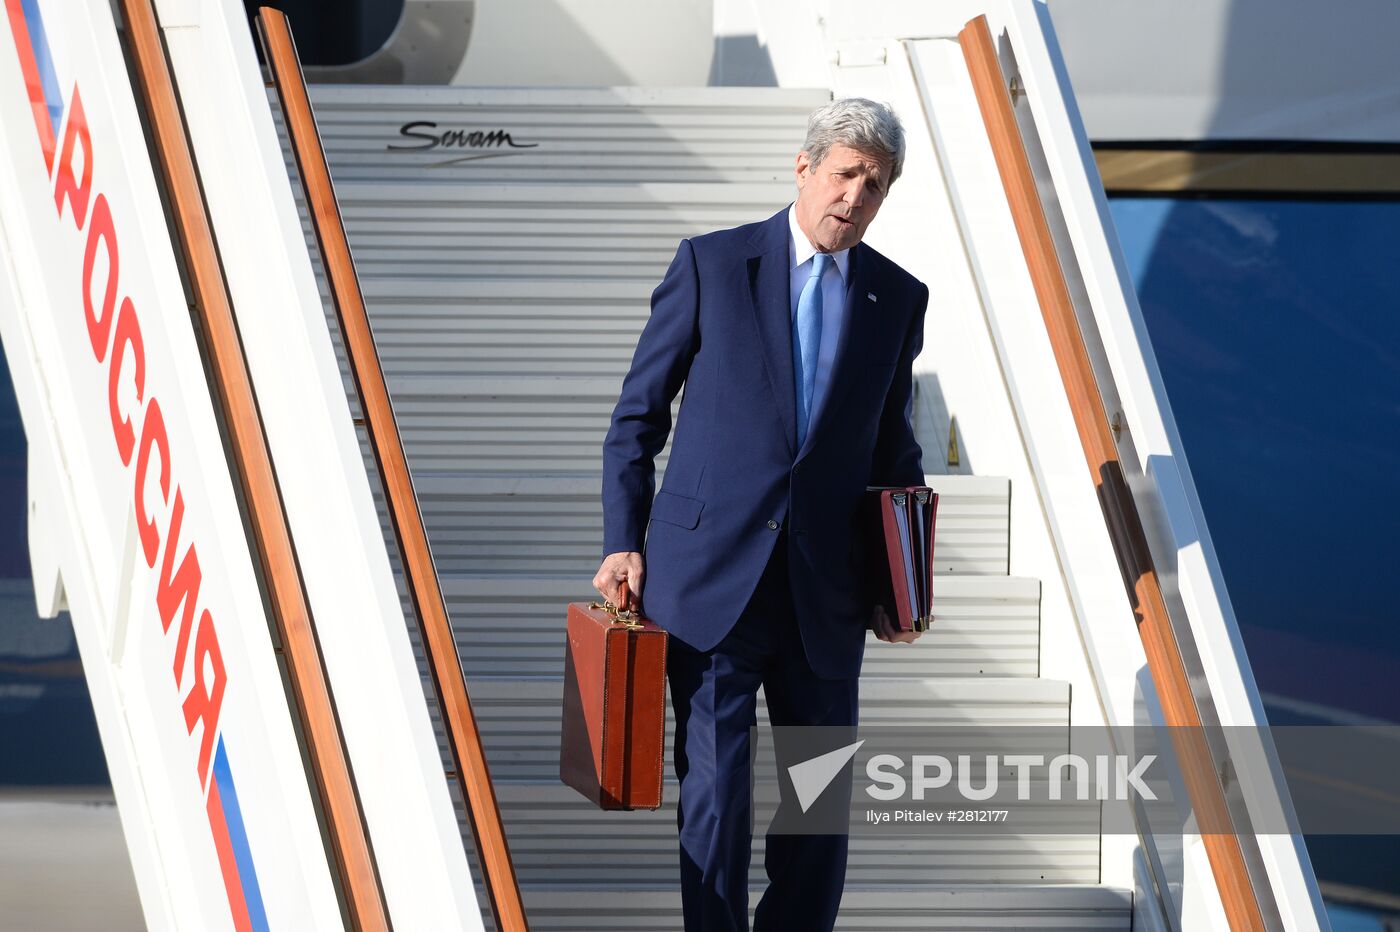 U.S. Secretary of State John Kerry arrives in Moscow